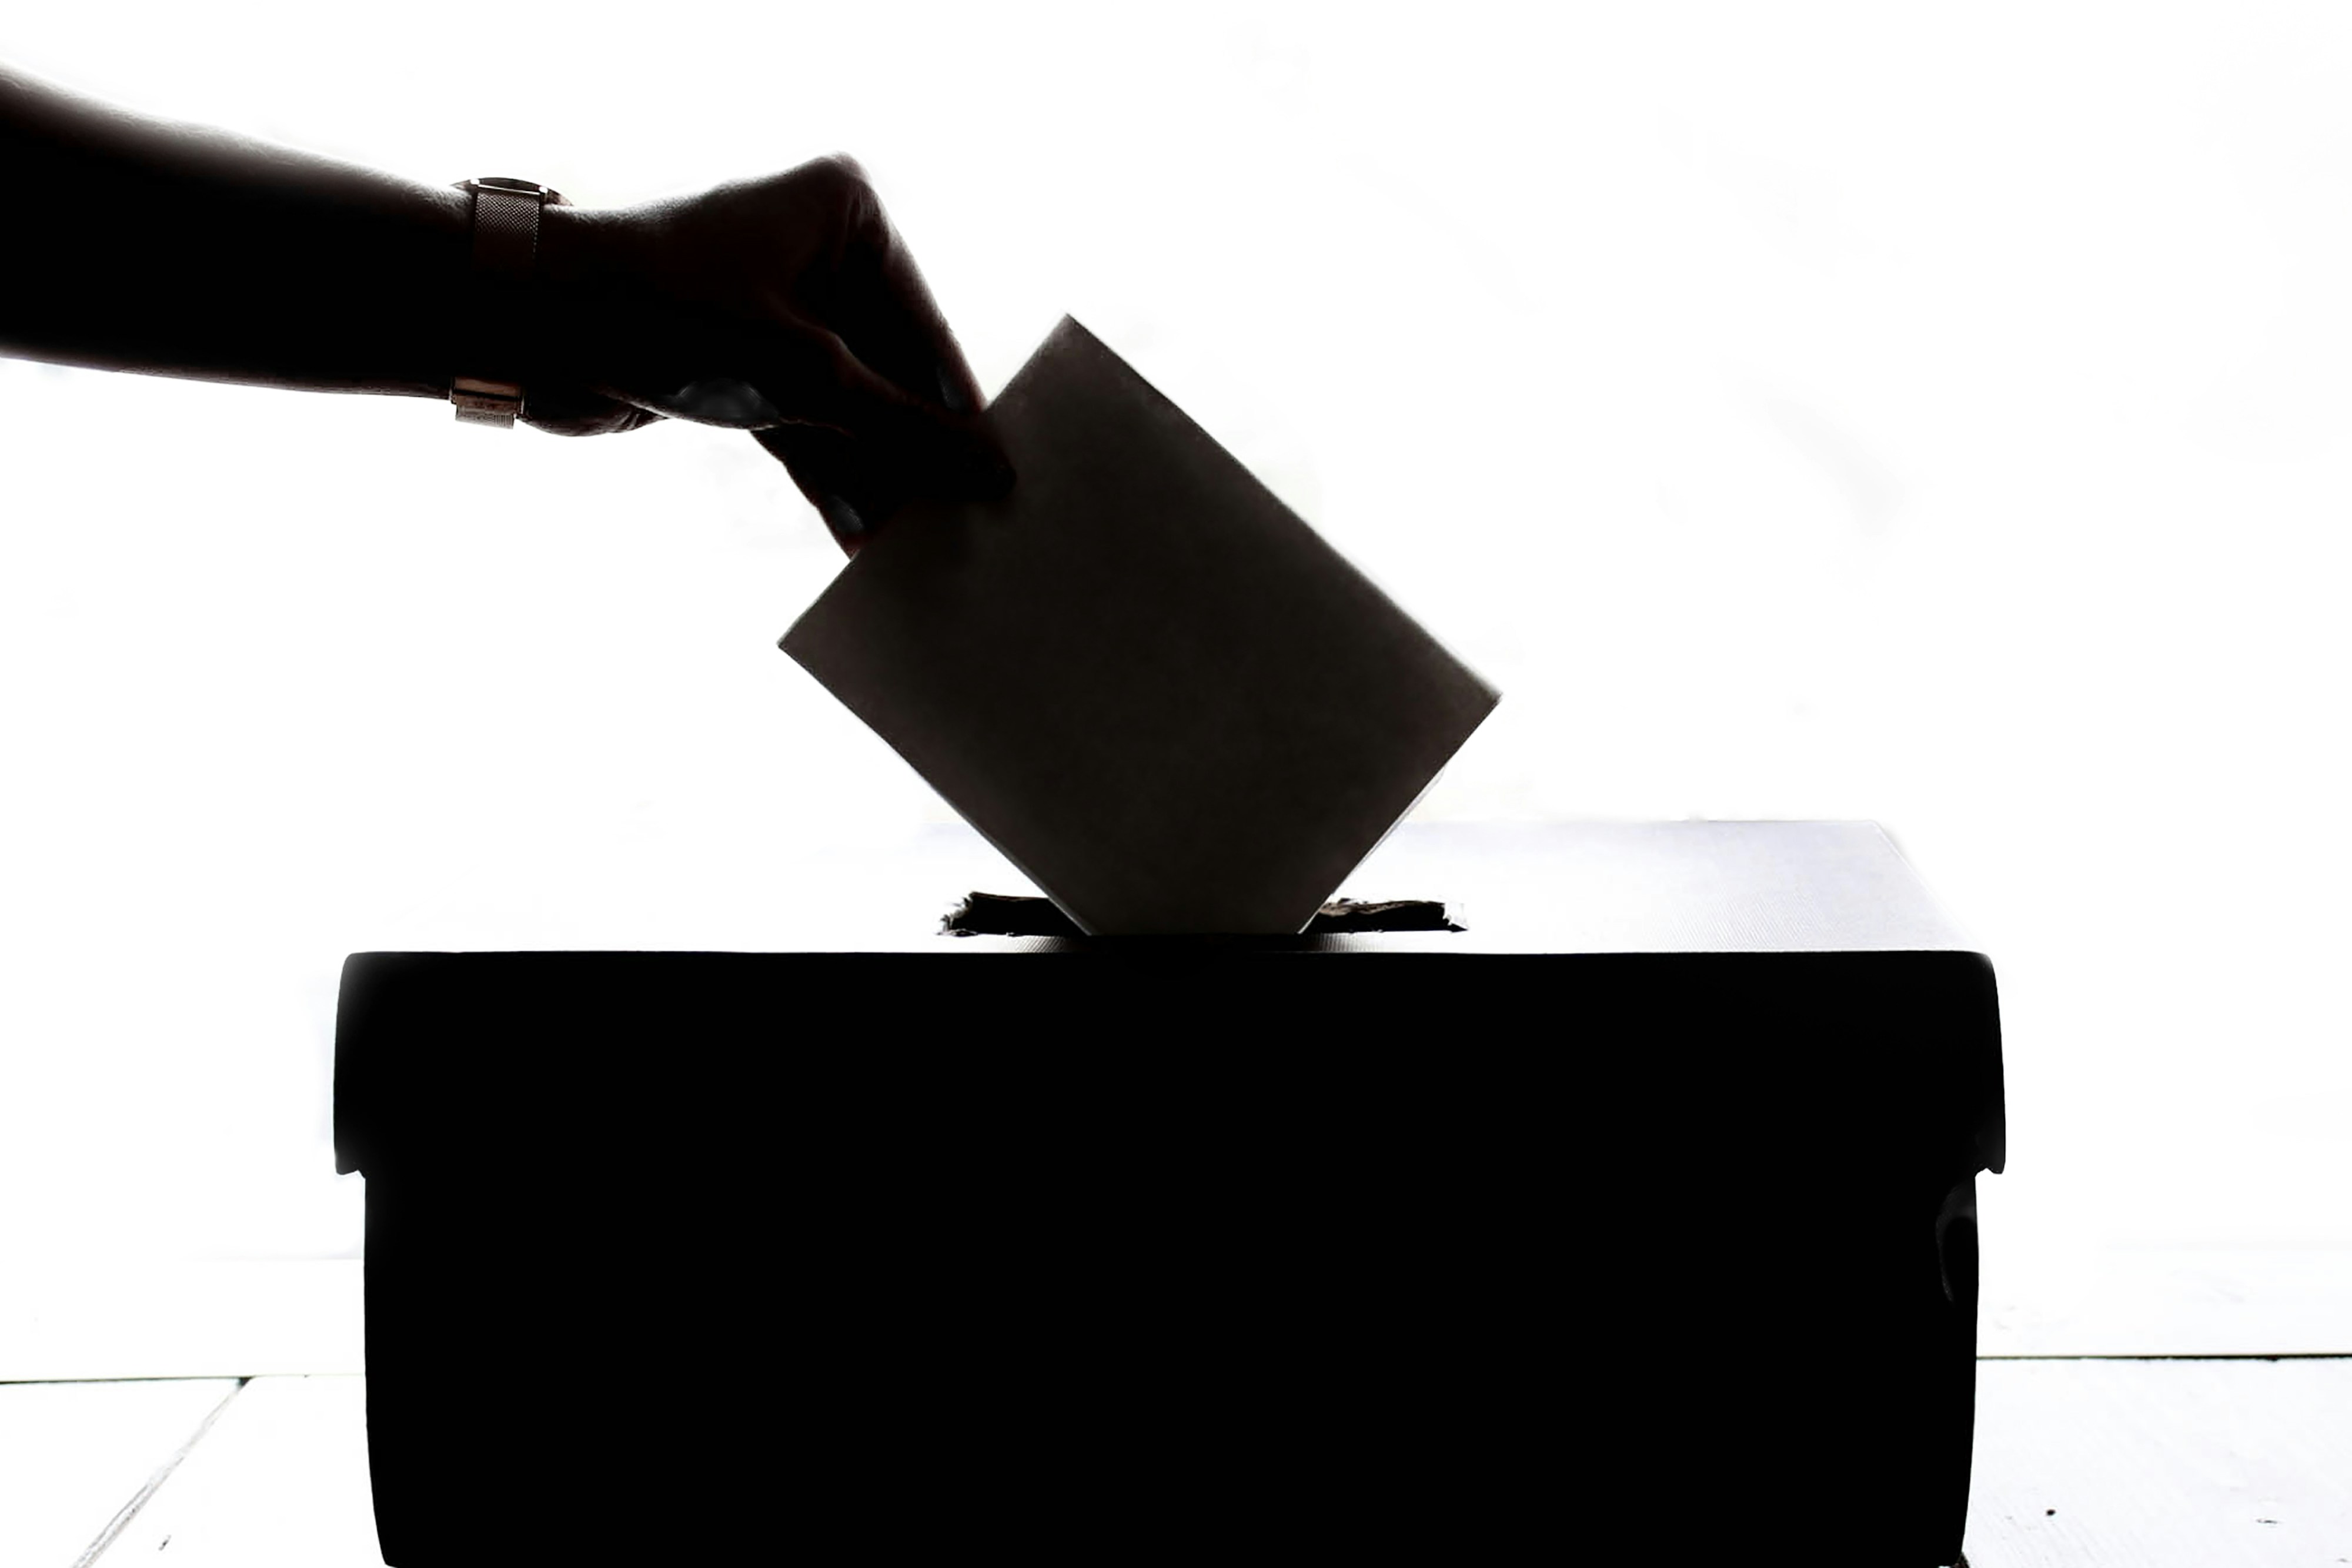 Black and white image of a person posting their vote into a box